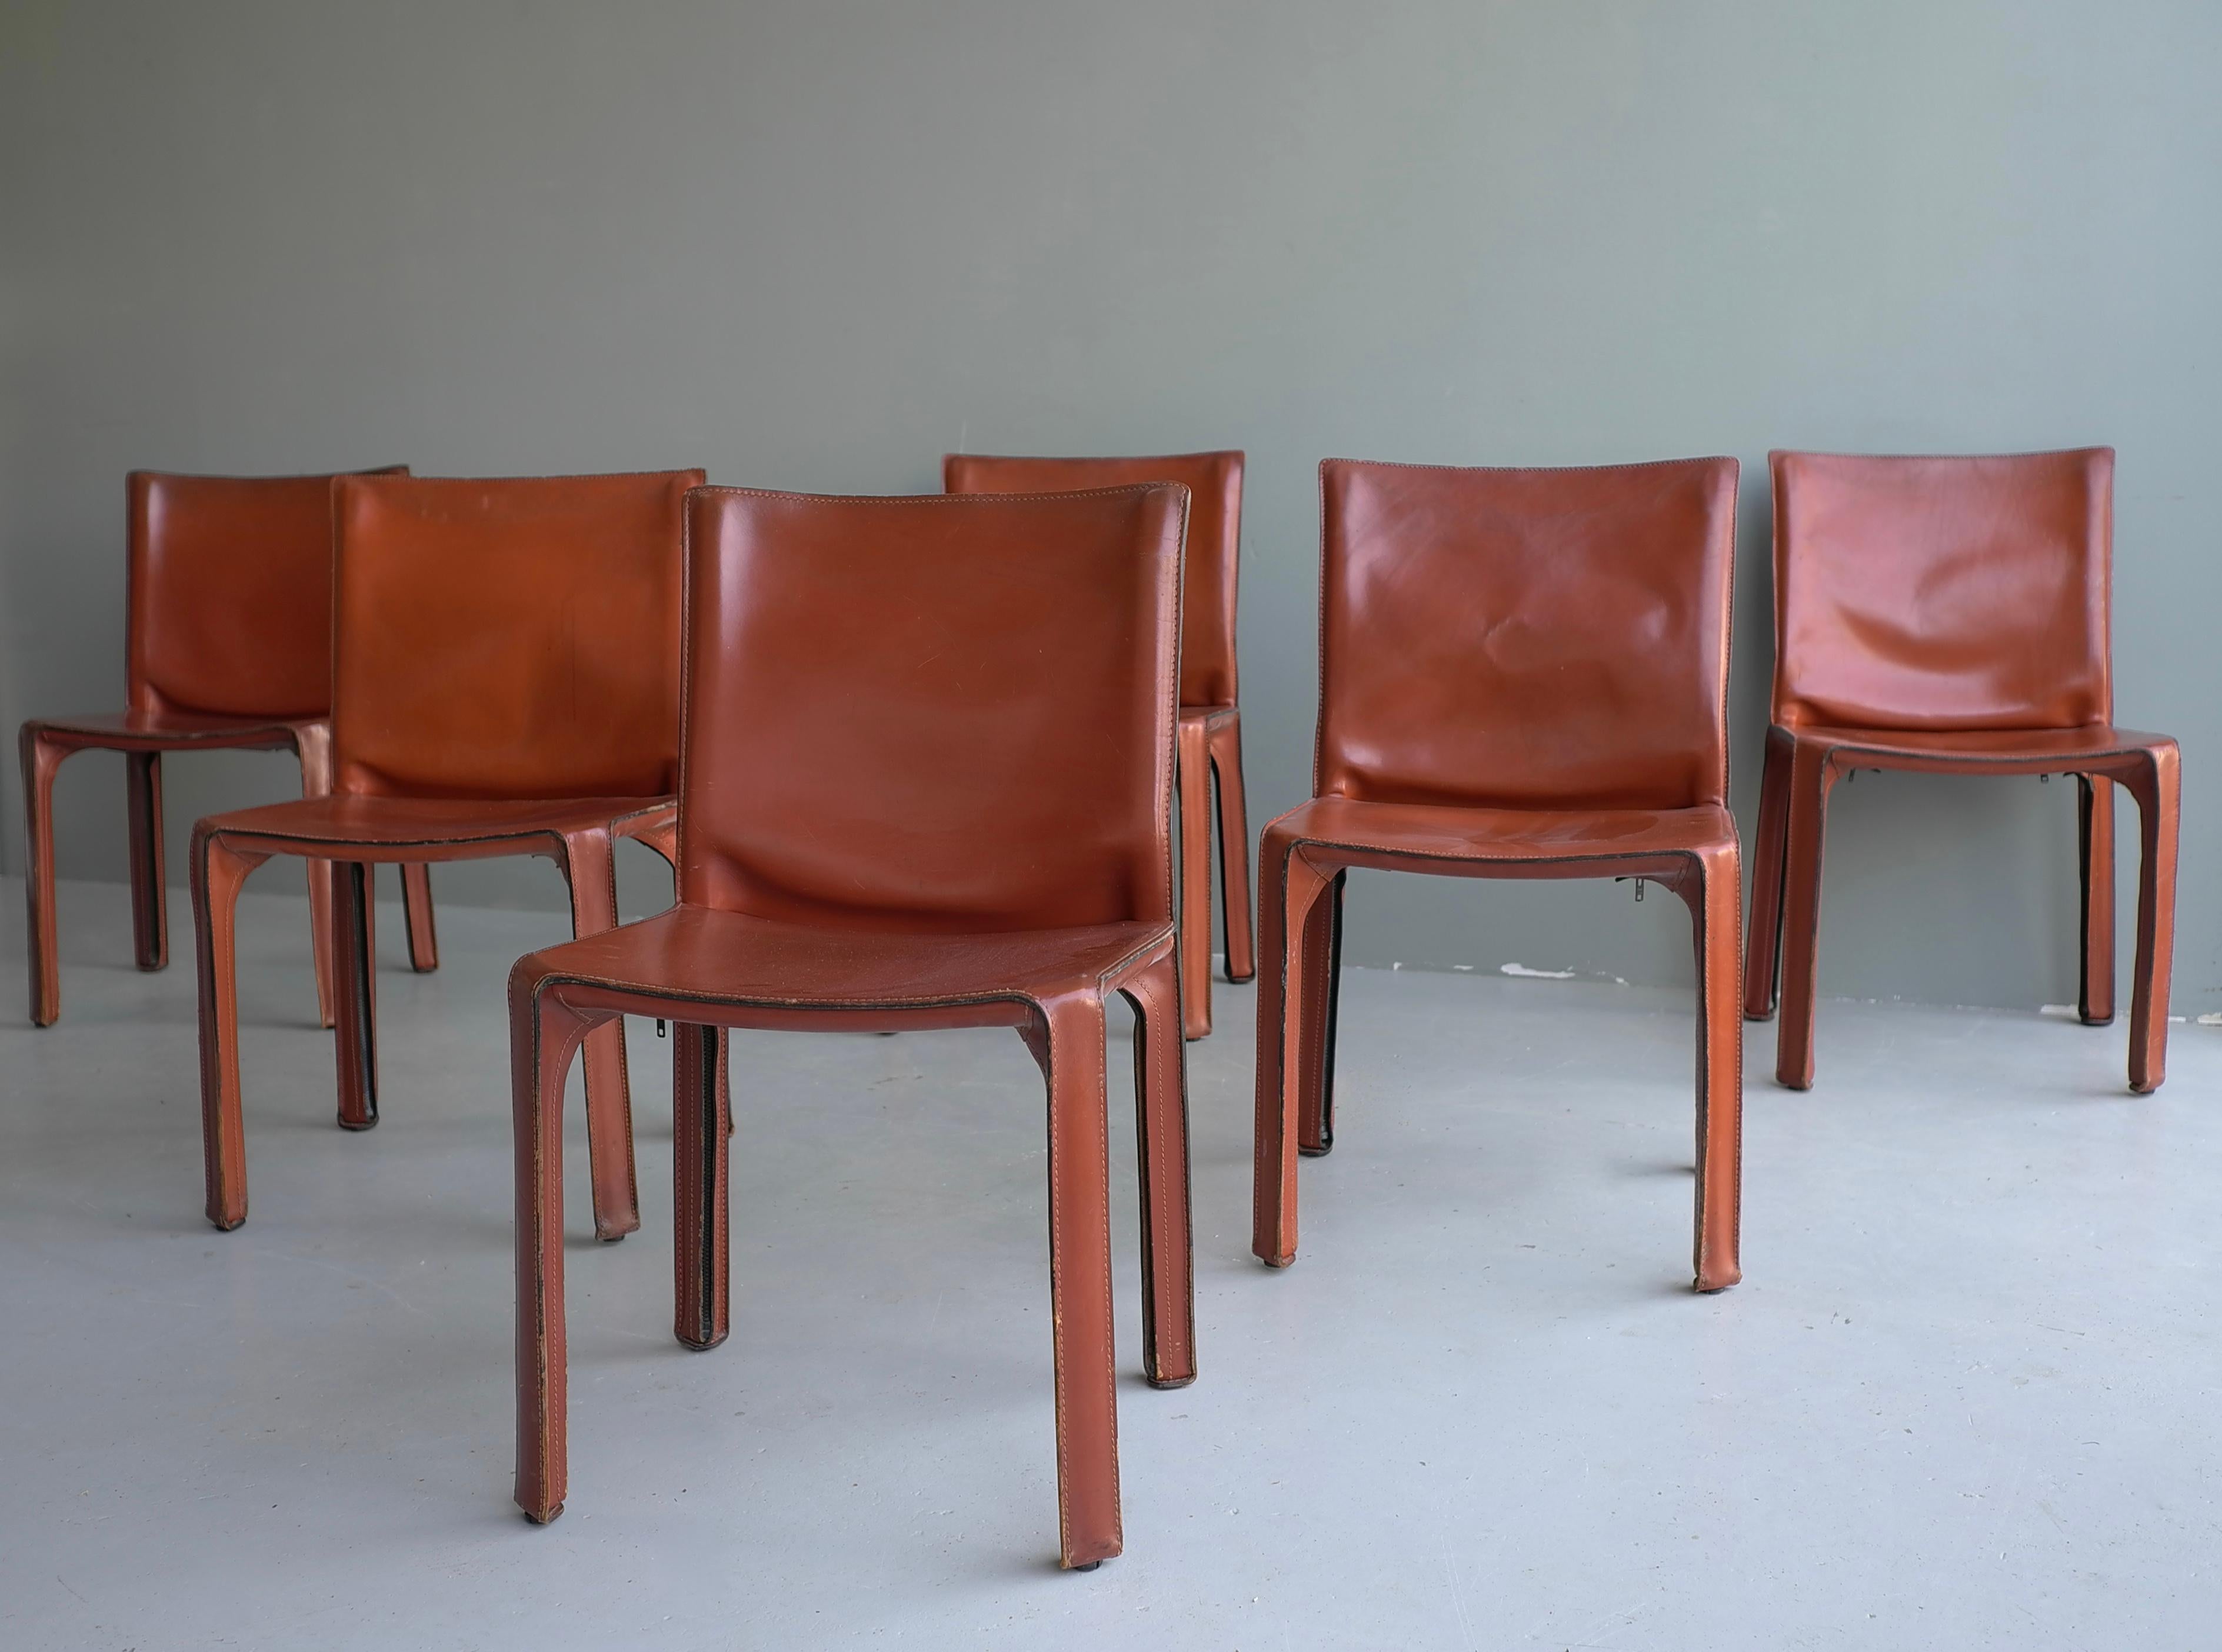 11x leather 412 cab chairs by Mario Bellini for Cassina.

Wonderful original patina and wear. Broken in like your favorite baseball glove. 
They have various patina, stains, rubs, scratches and wear. And we wouldn't have it any other way! You